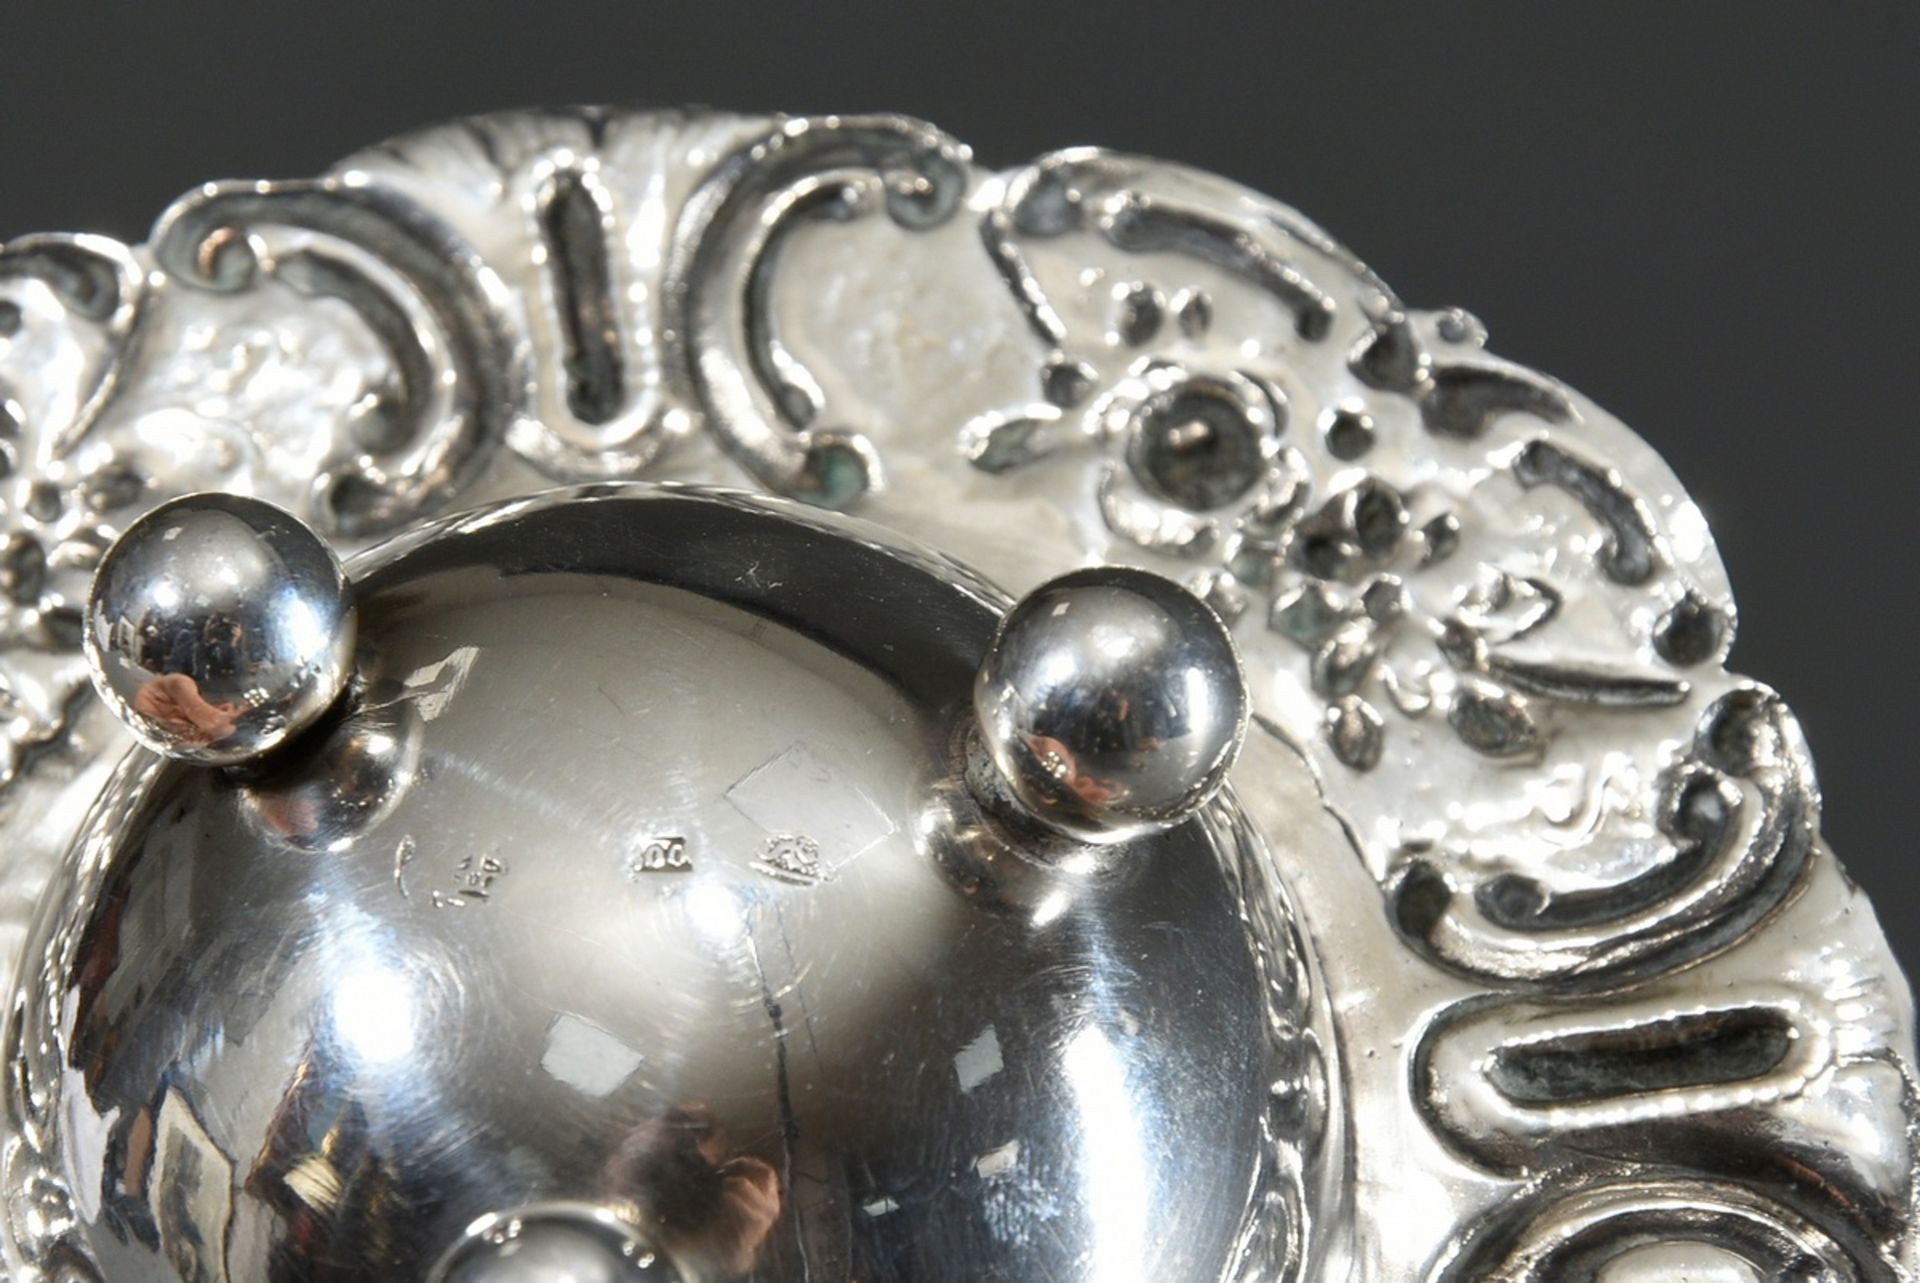 2 pieces richly reliefed tea glass on saucer and tea strainer on saucer "Roses and Rocailles", Germ - Image 6 of 7